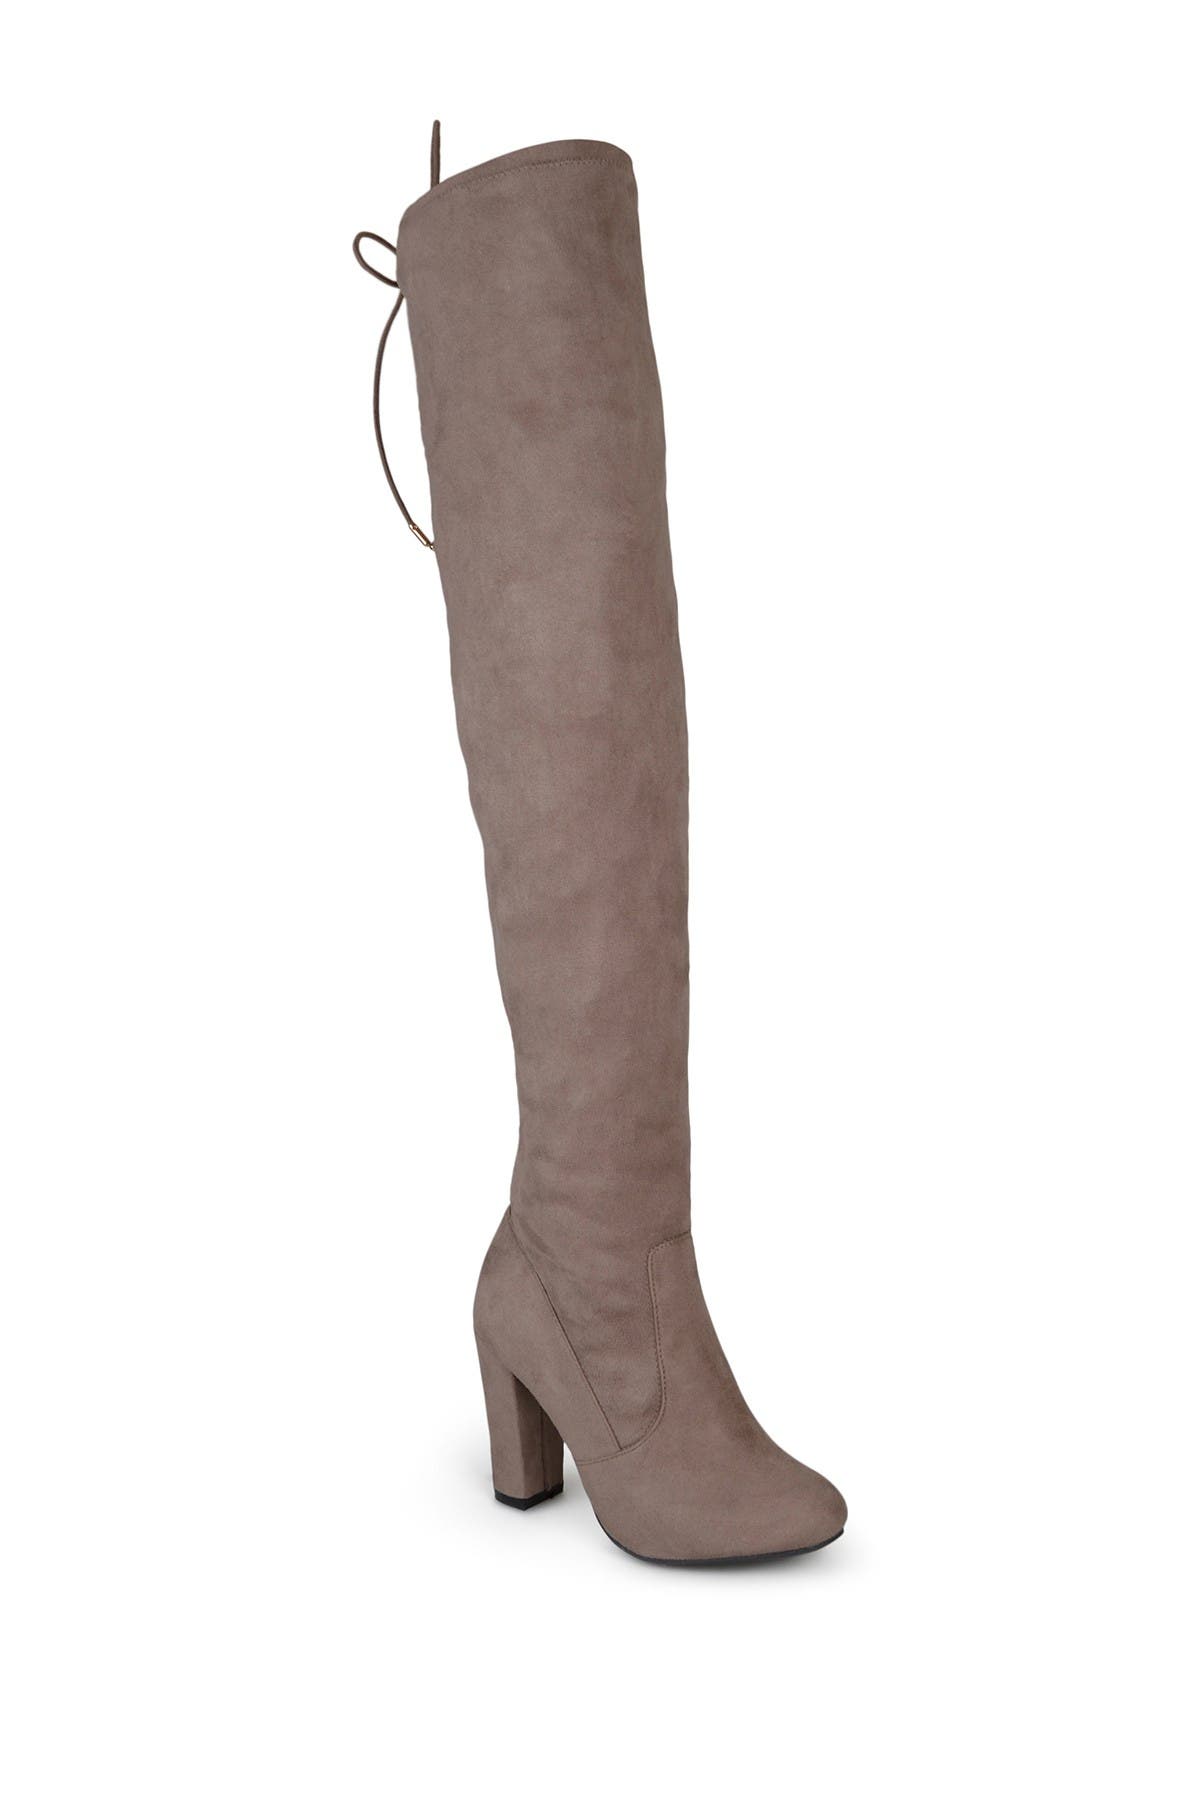 journee collection maya wide calf thigh high boot